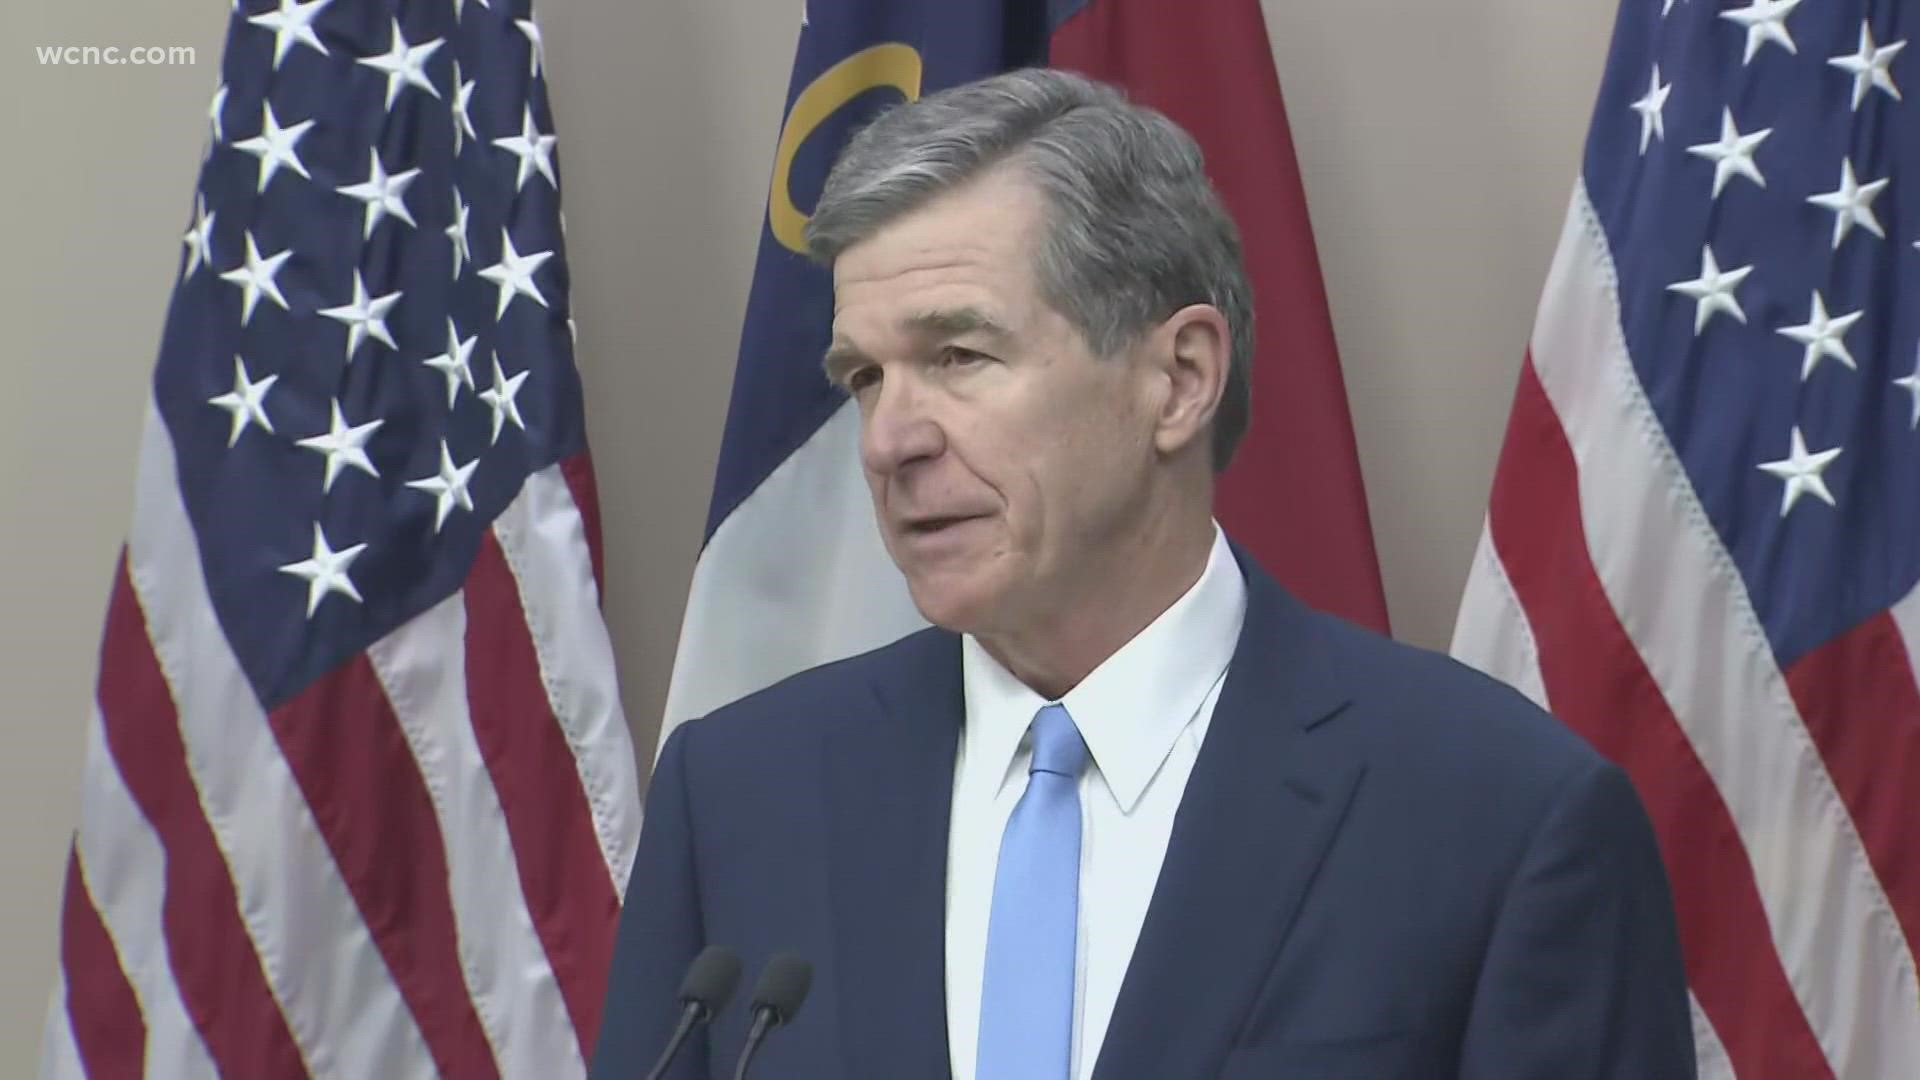 North Carolina's new $25.9 billion budget gives teachers an average 5% raise over 2 years, plus a bonus of at least $2,300 in federal pandemic relief money.